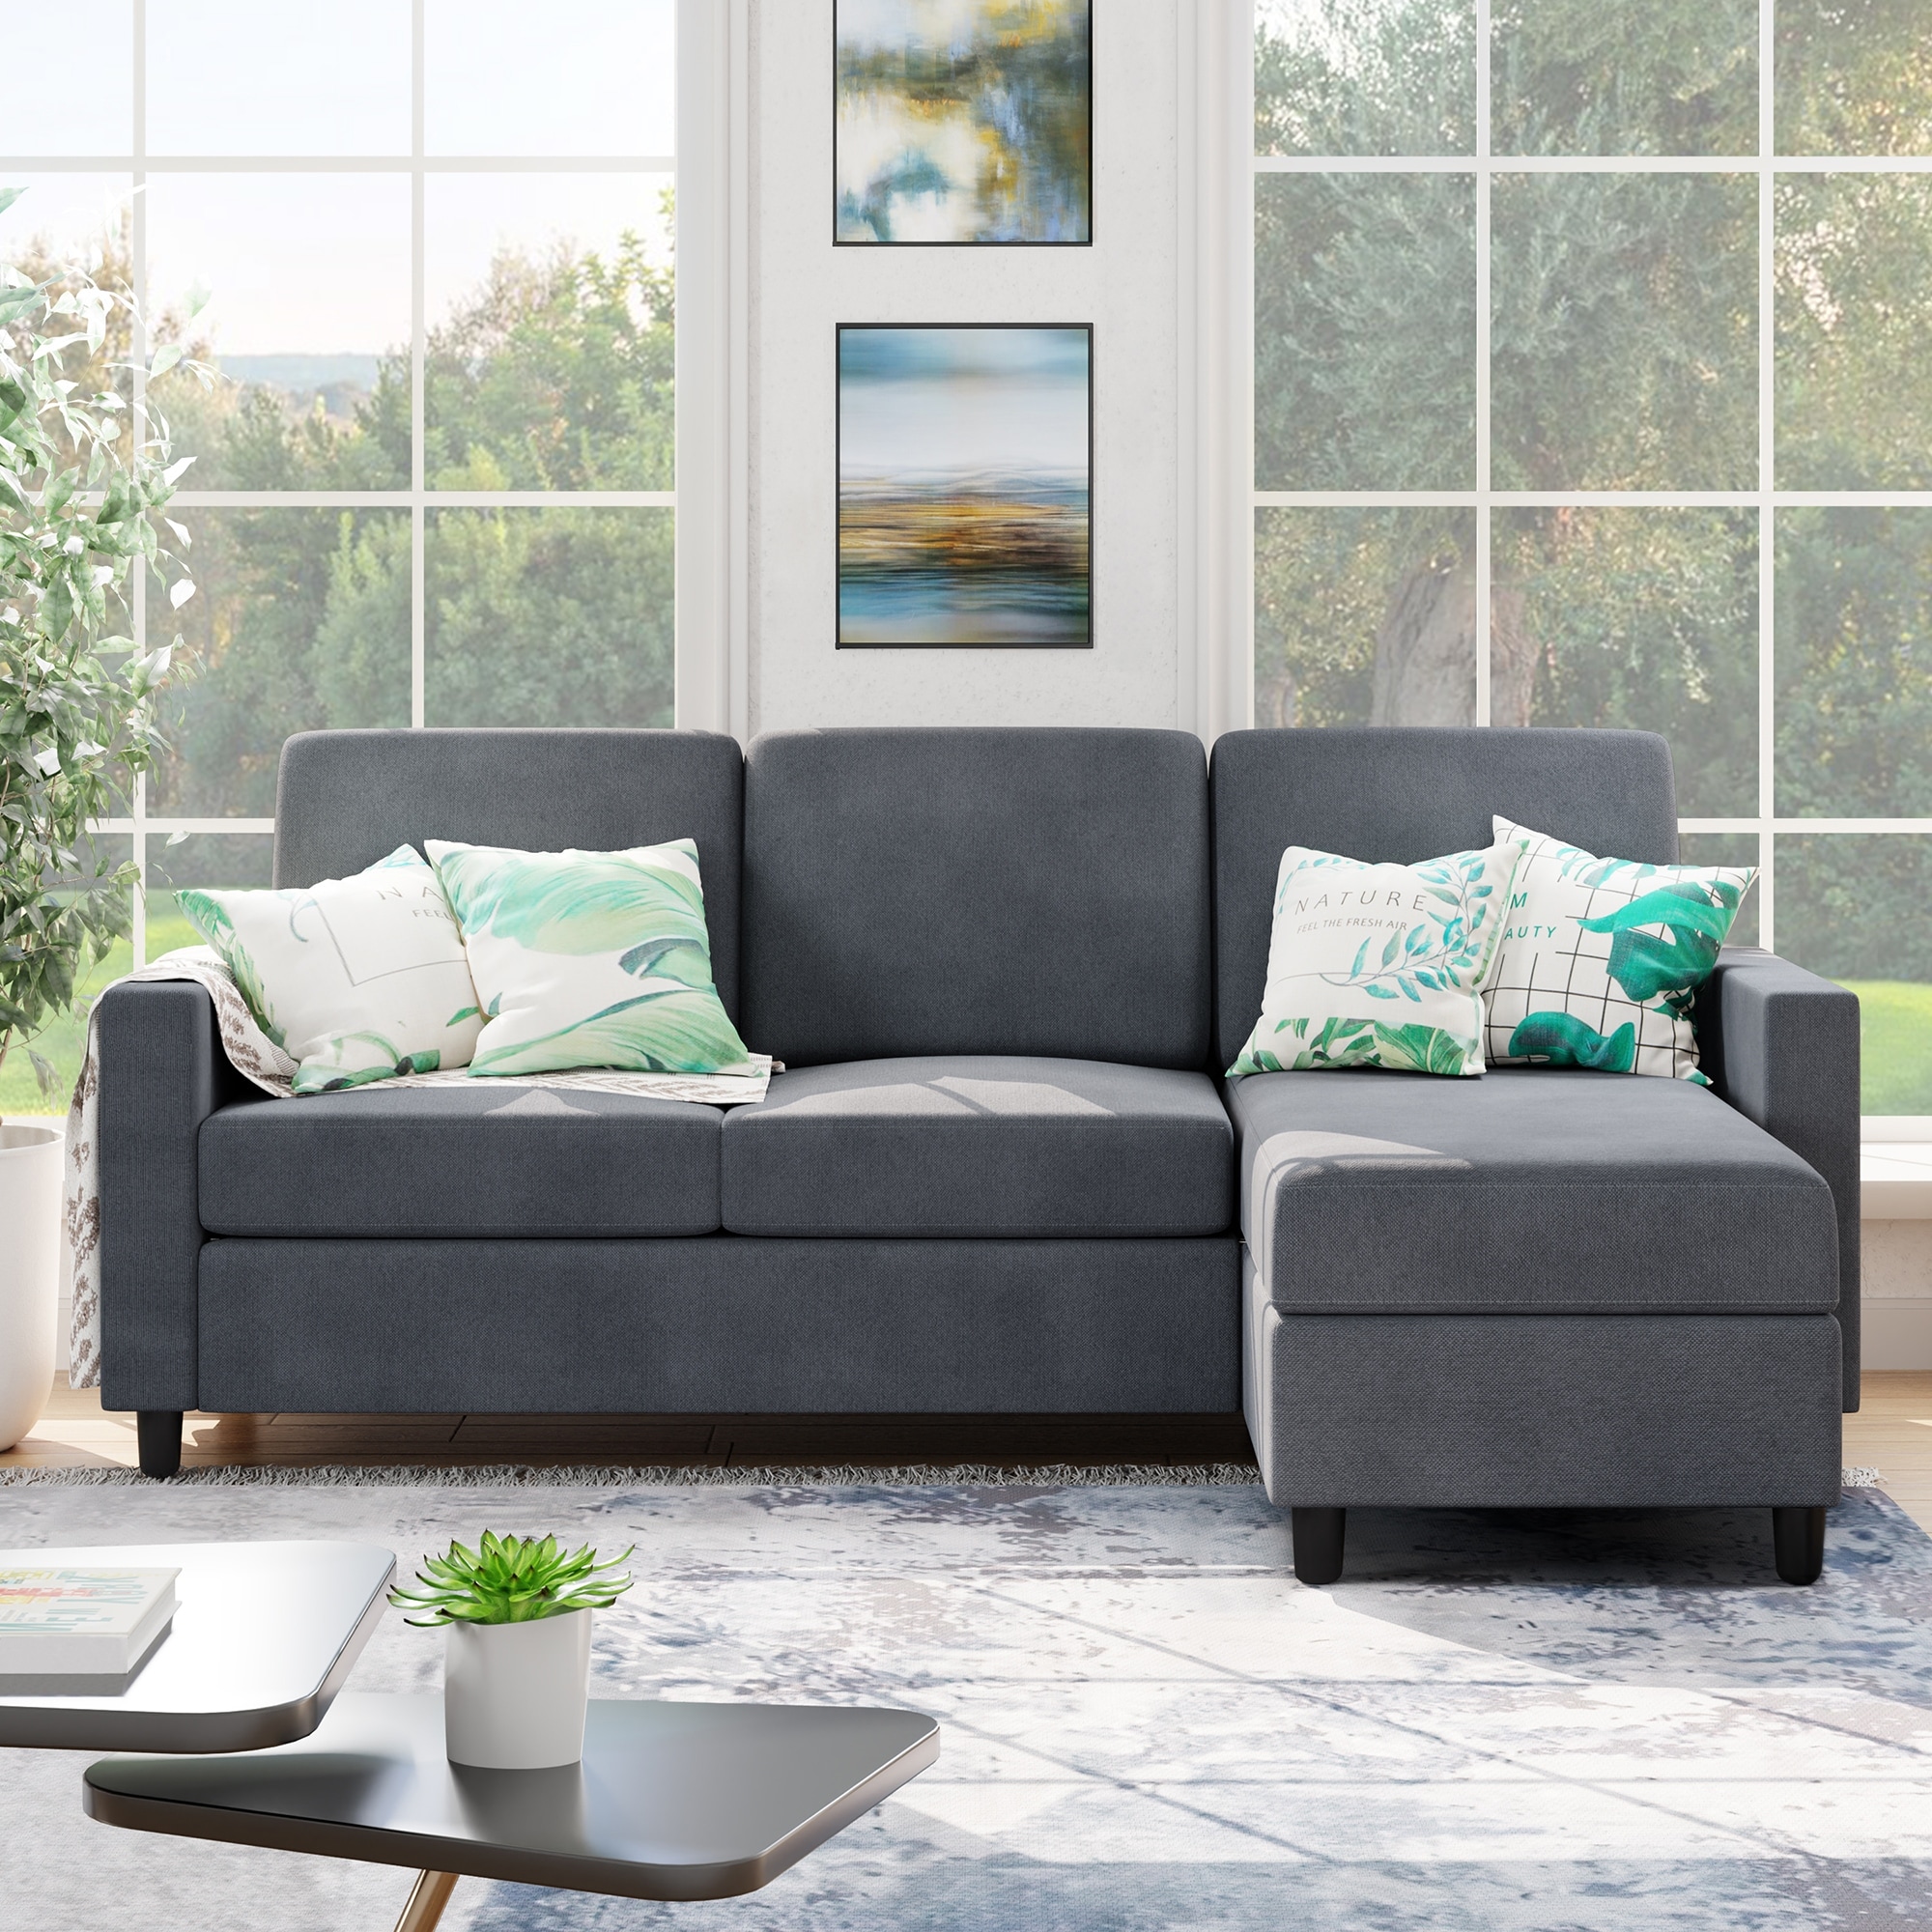 How to Place a Rug Under a Sectional: Your 6 Best Options - Fifti Fifti